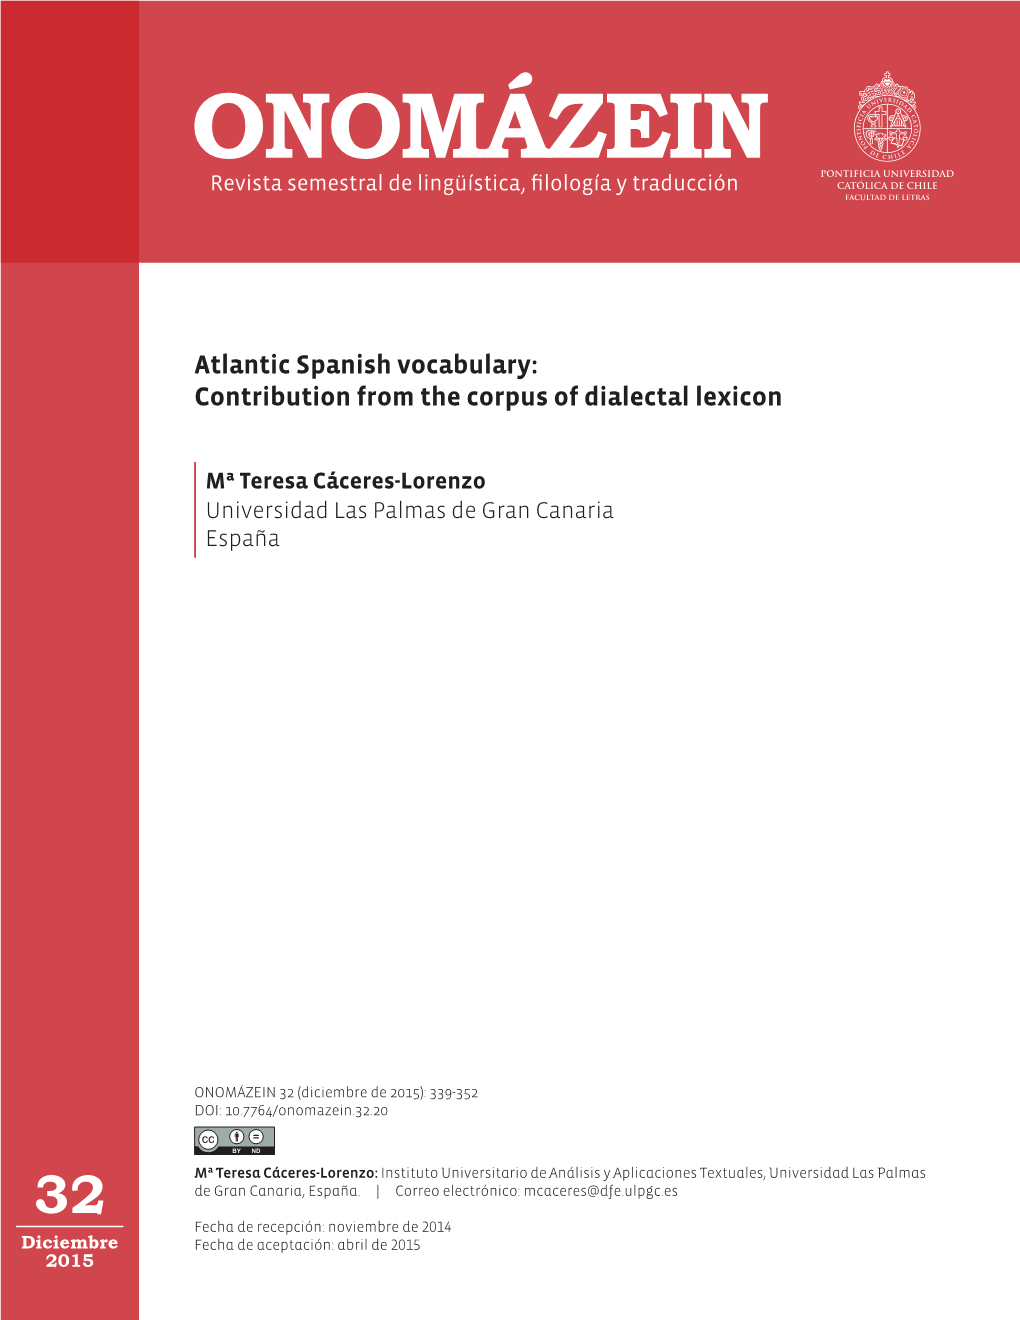 Atlantic Spanish Vocabulary: Contribution from the Corpus of Dialectal Lexicon